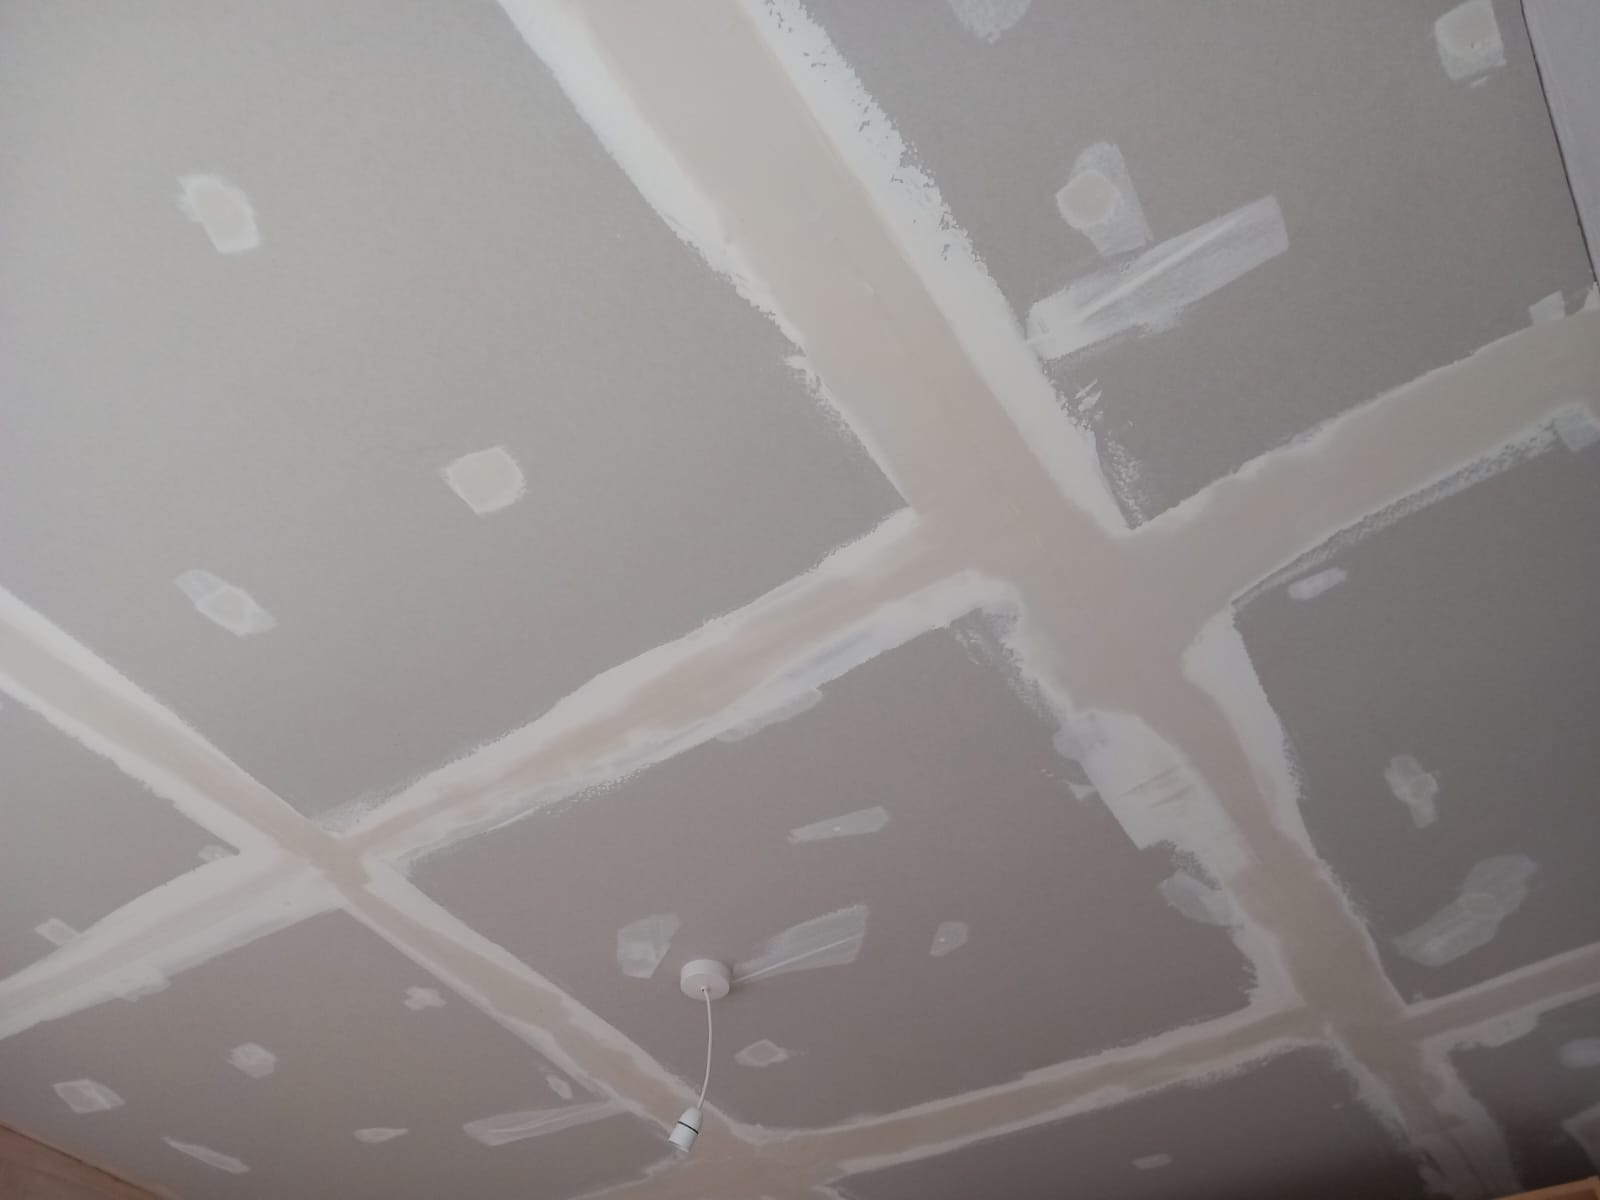 Large plasterboard ceiling with filled joints and a small lighting pendant.